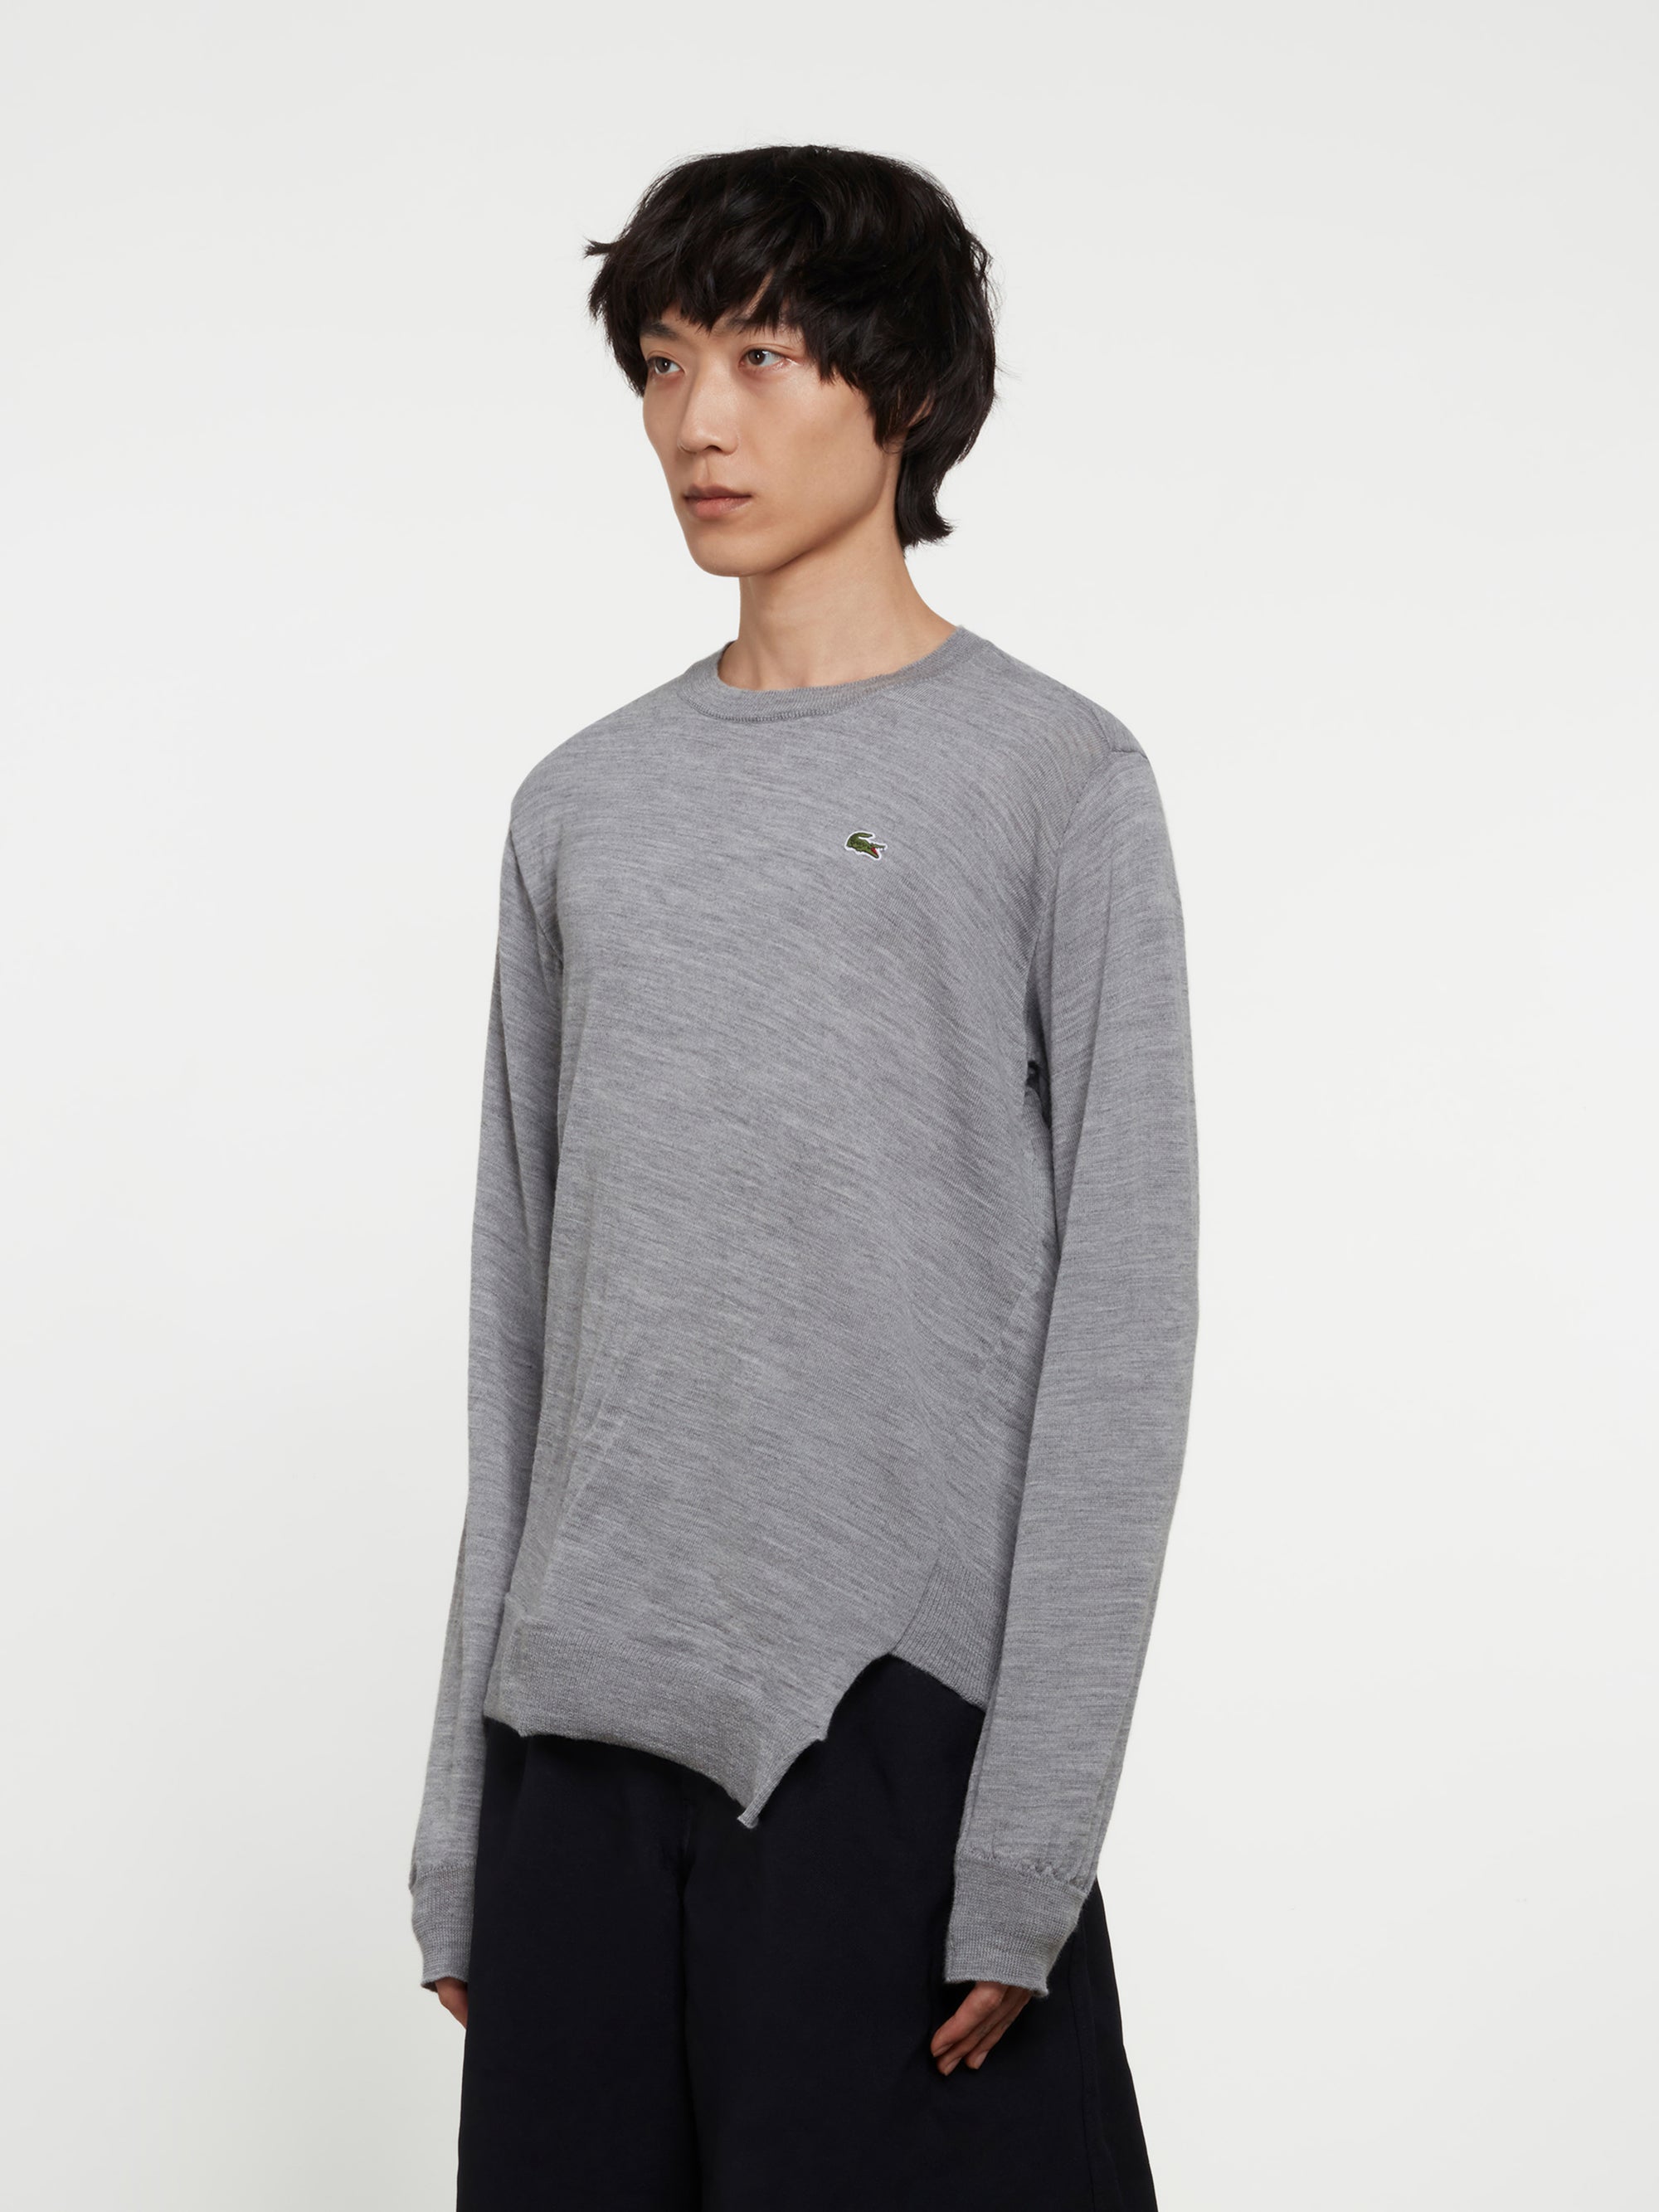 CDG Shirt - Lacoste Men’s Knit Sweater - (Grey) view 2